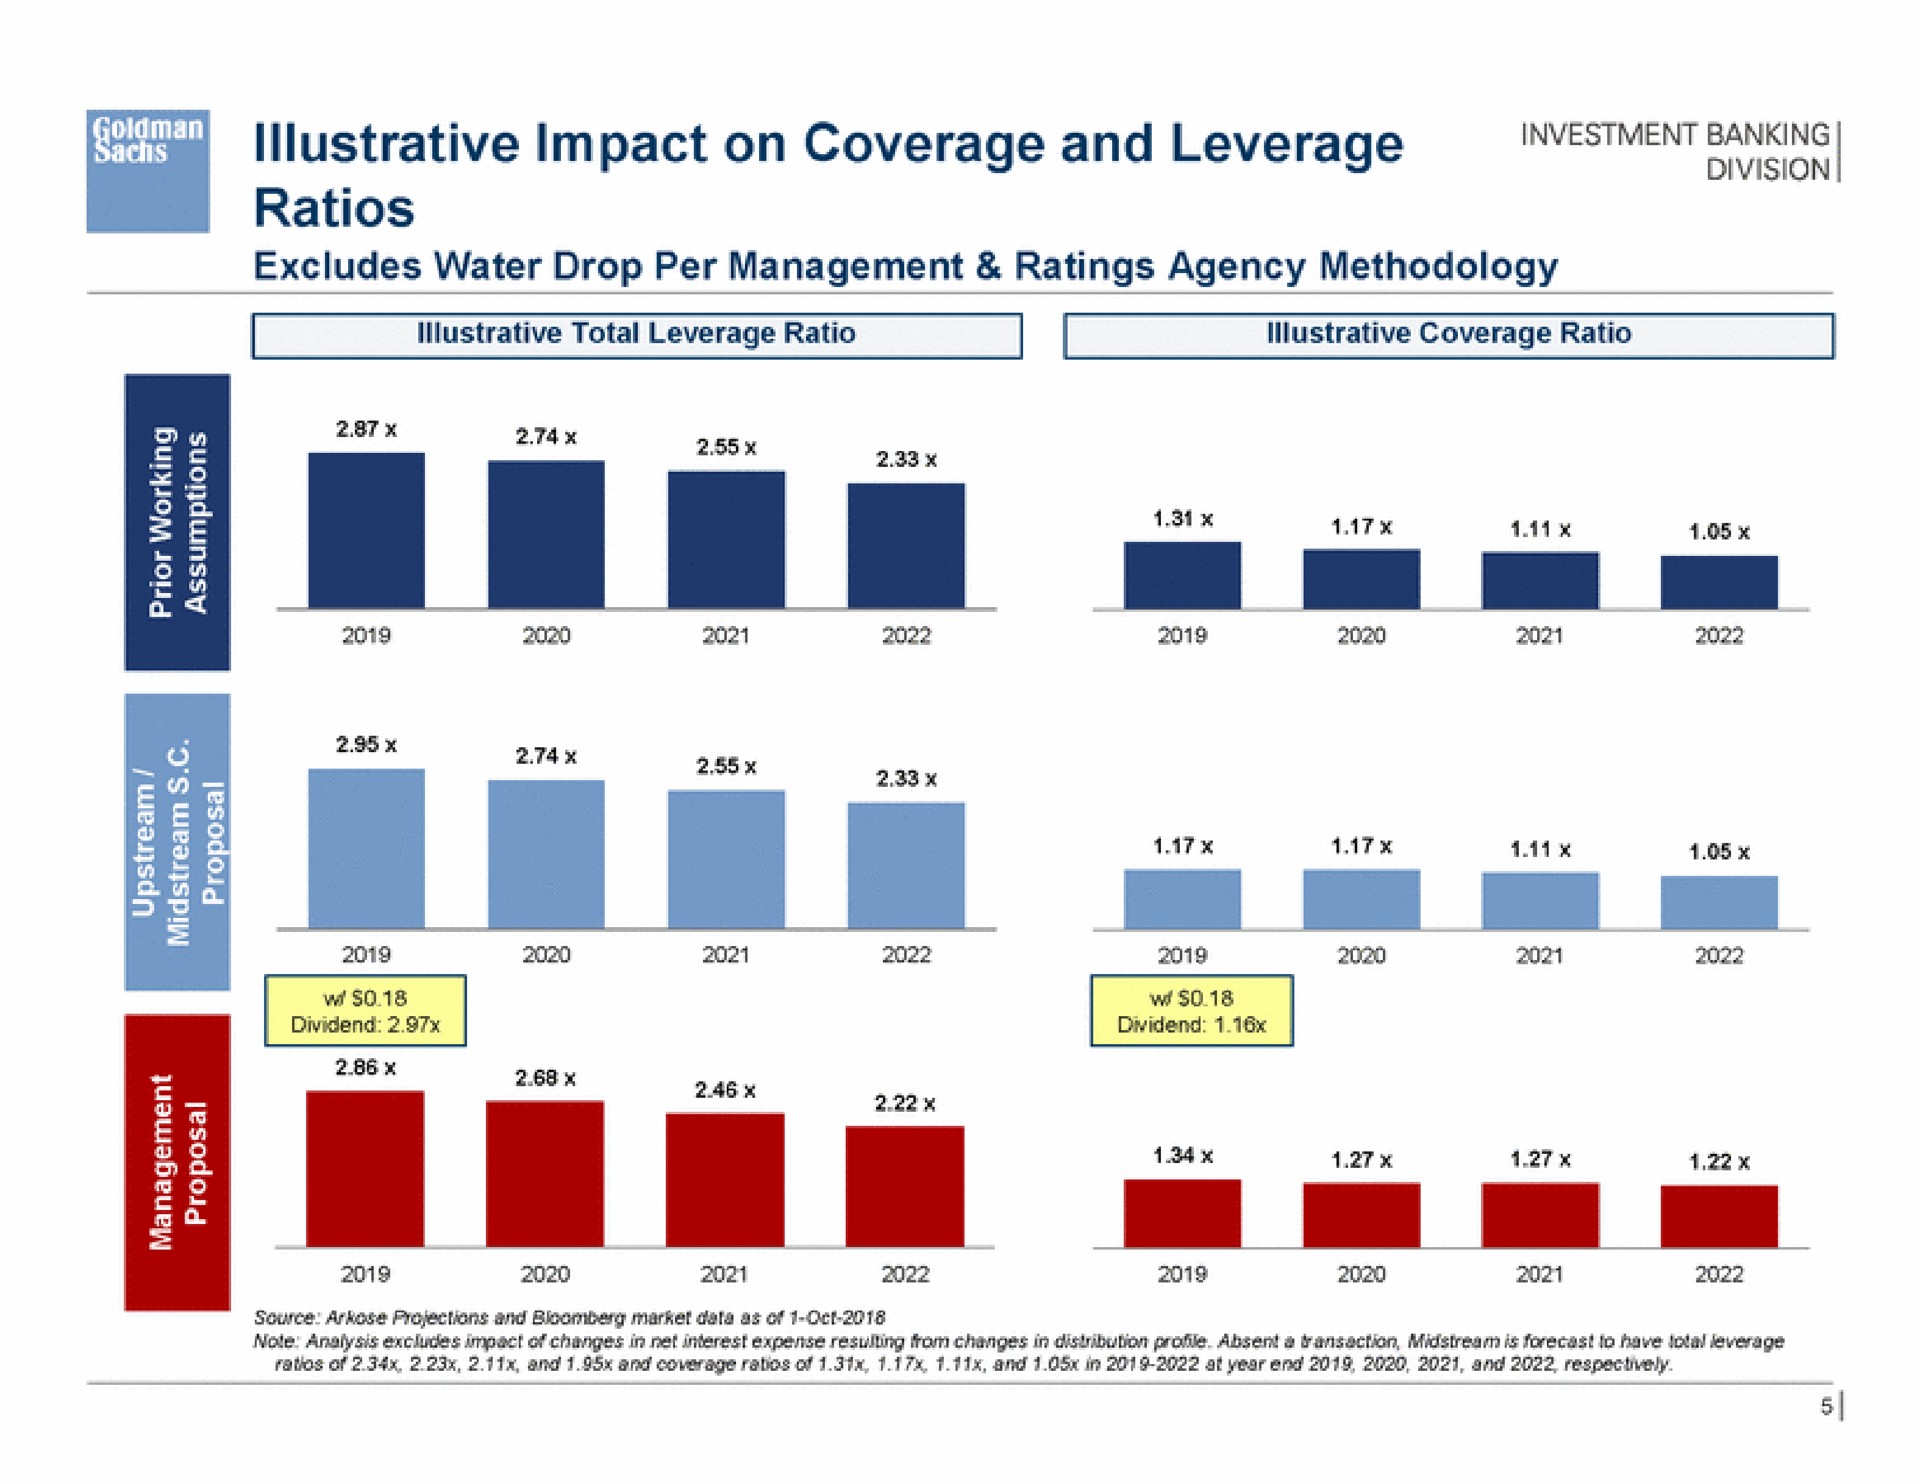 illustrative impact on coverage and leverage ratios rest bang i a | Goldman Sachs